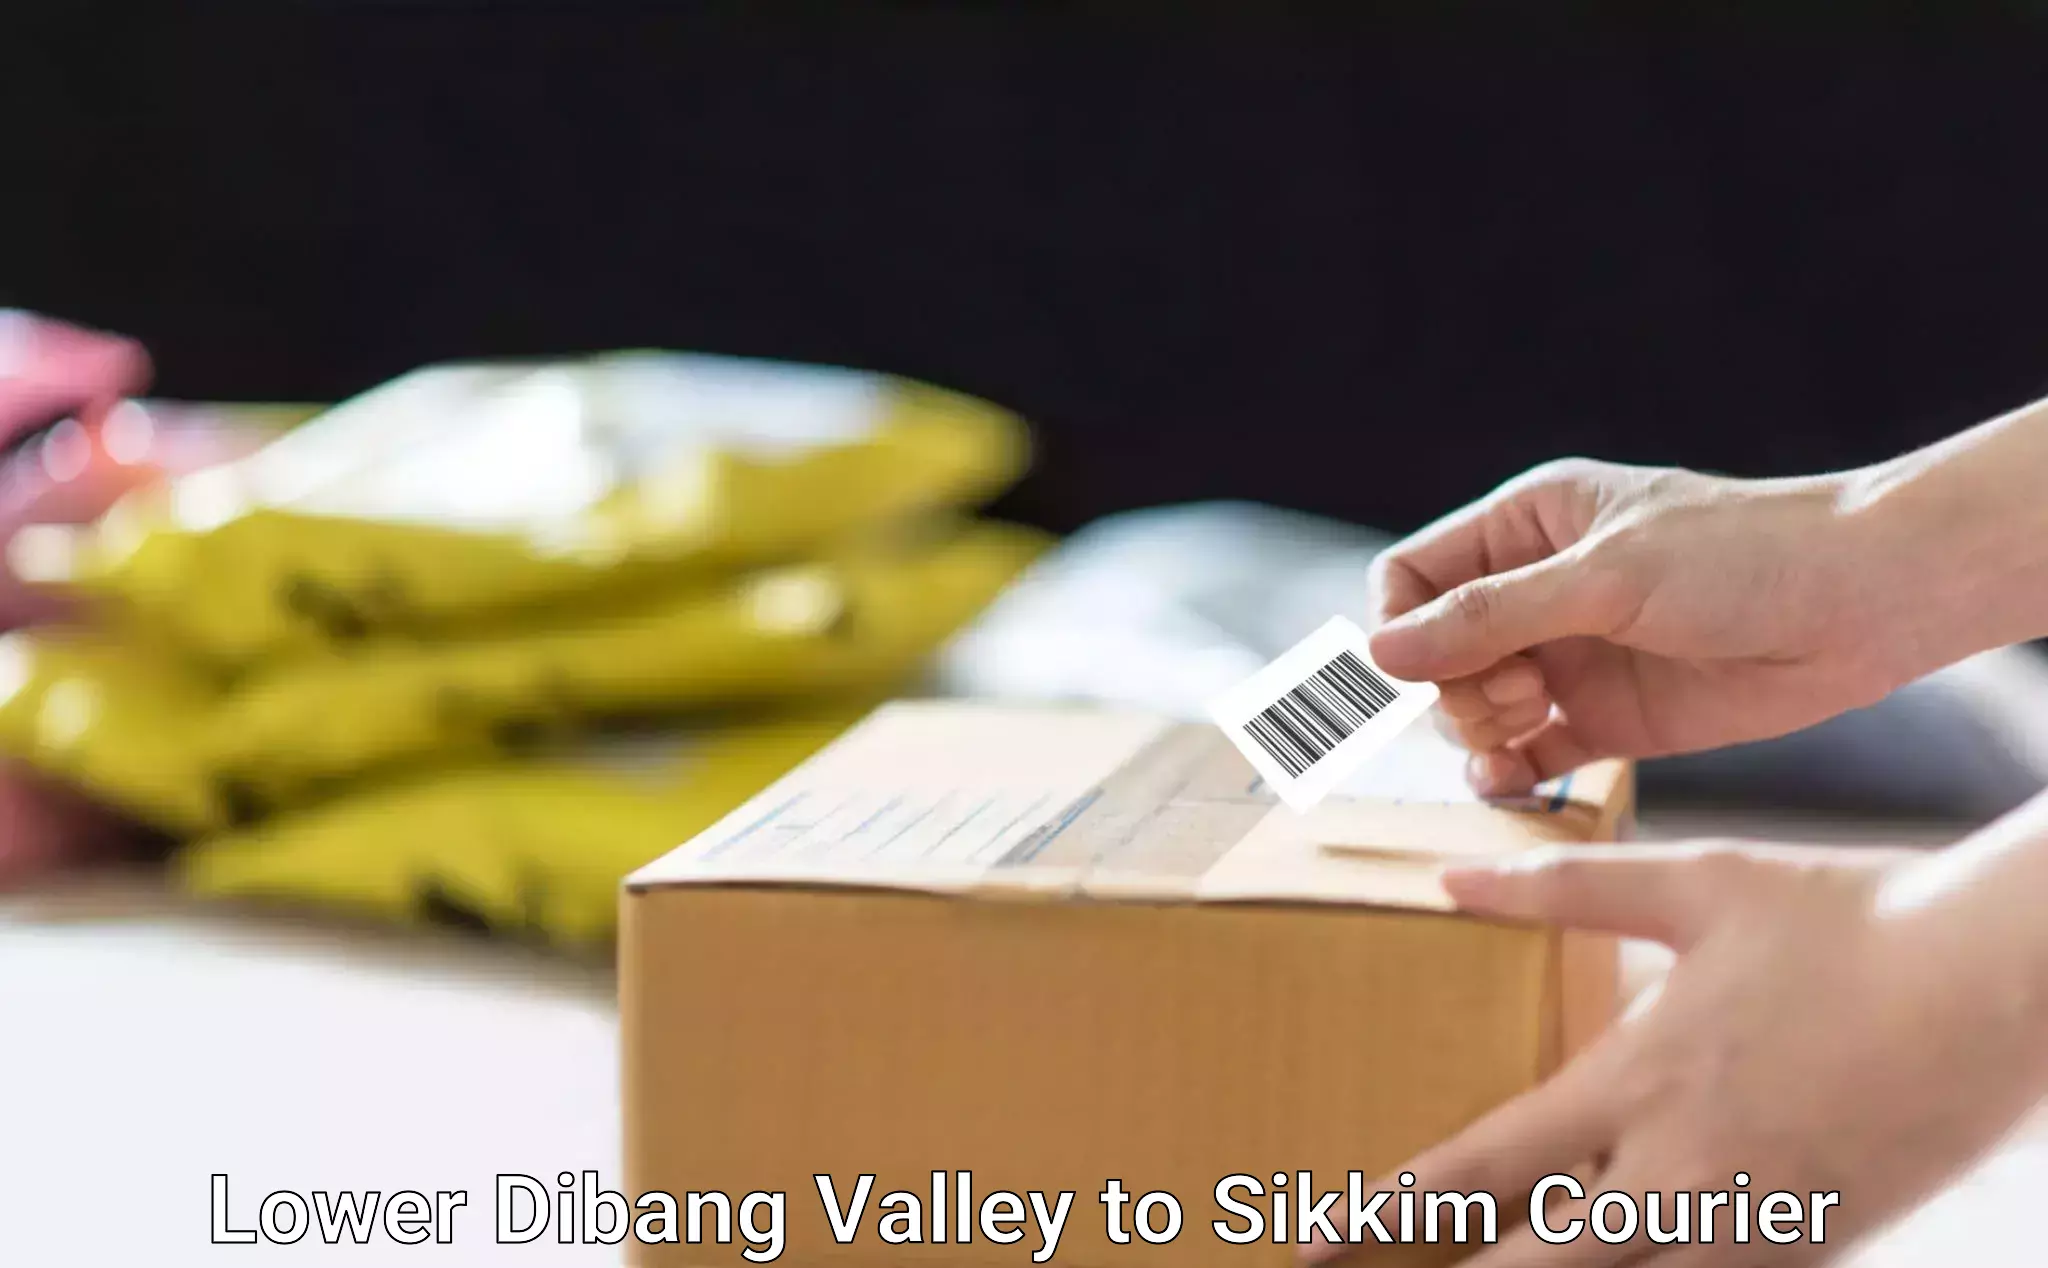 Efficient parcel transport in Lower Dibang Valley to North Sikkim